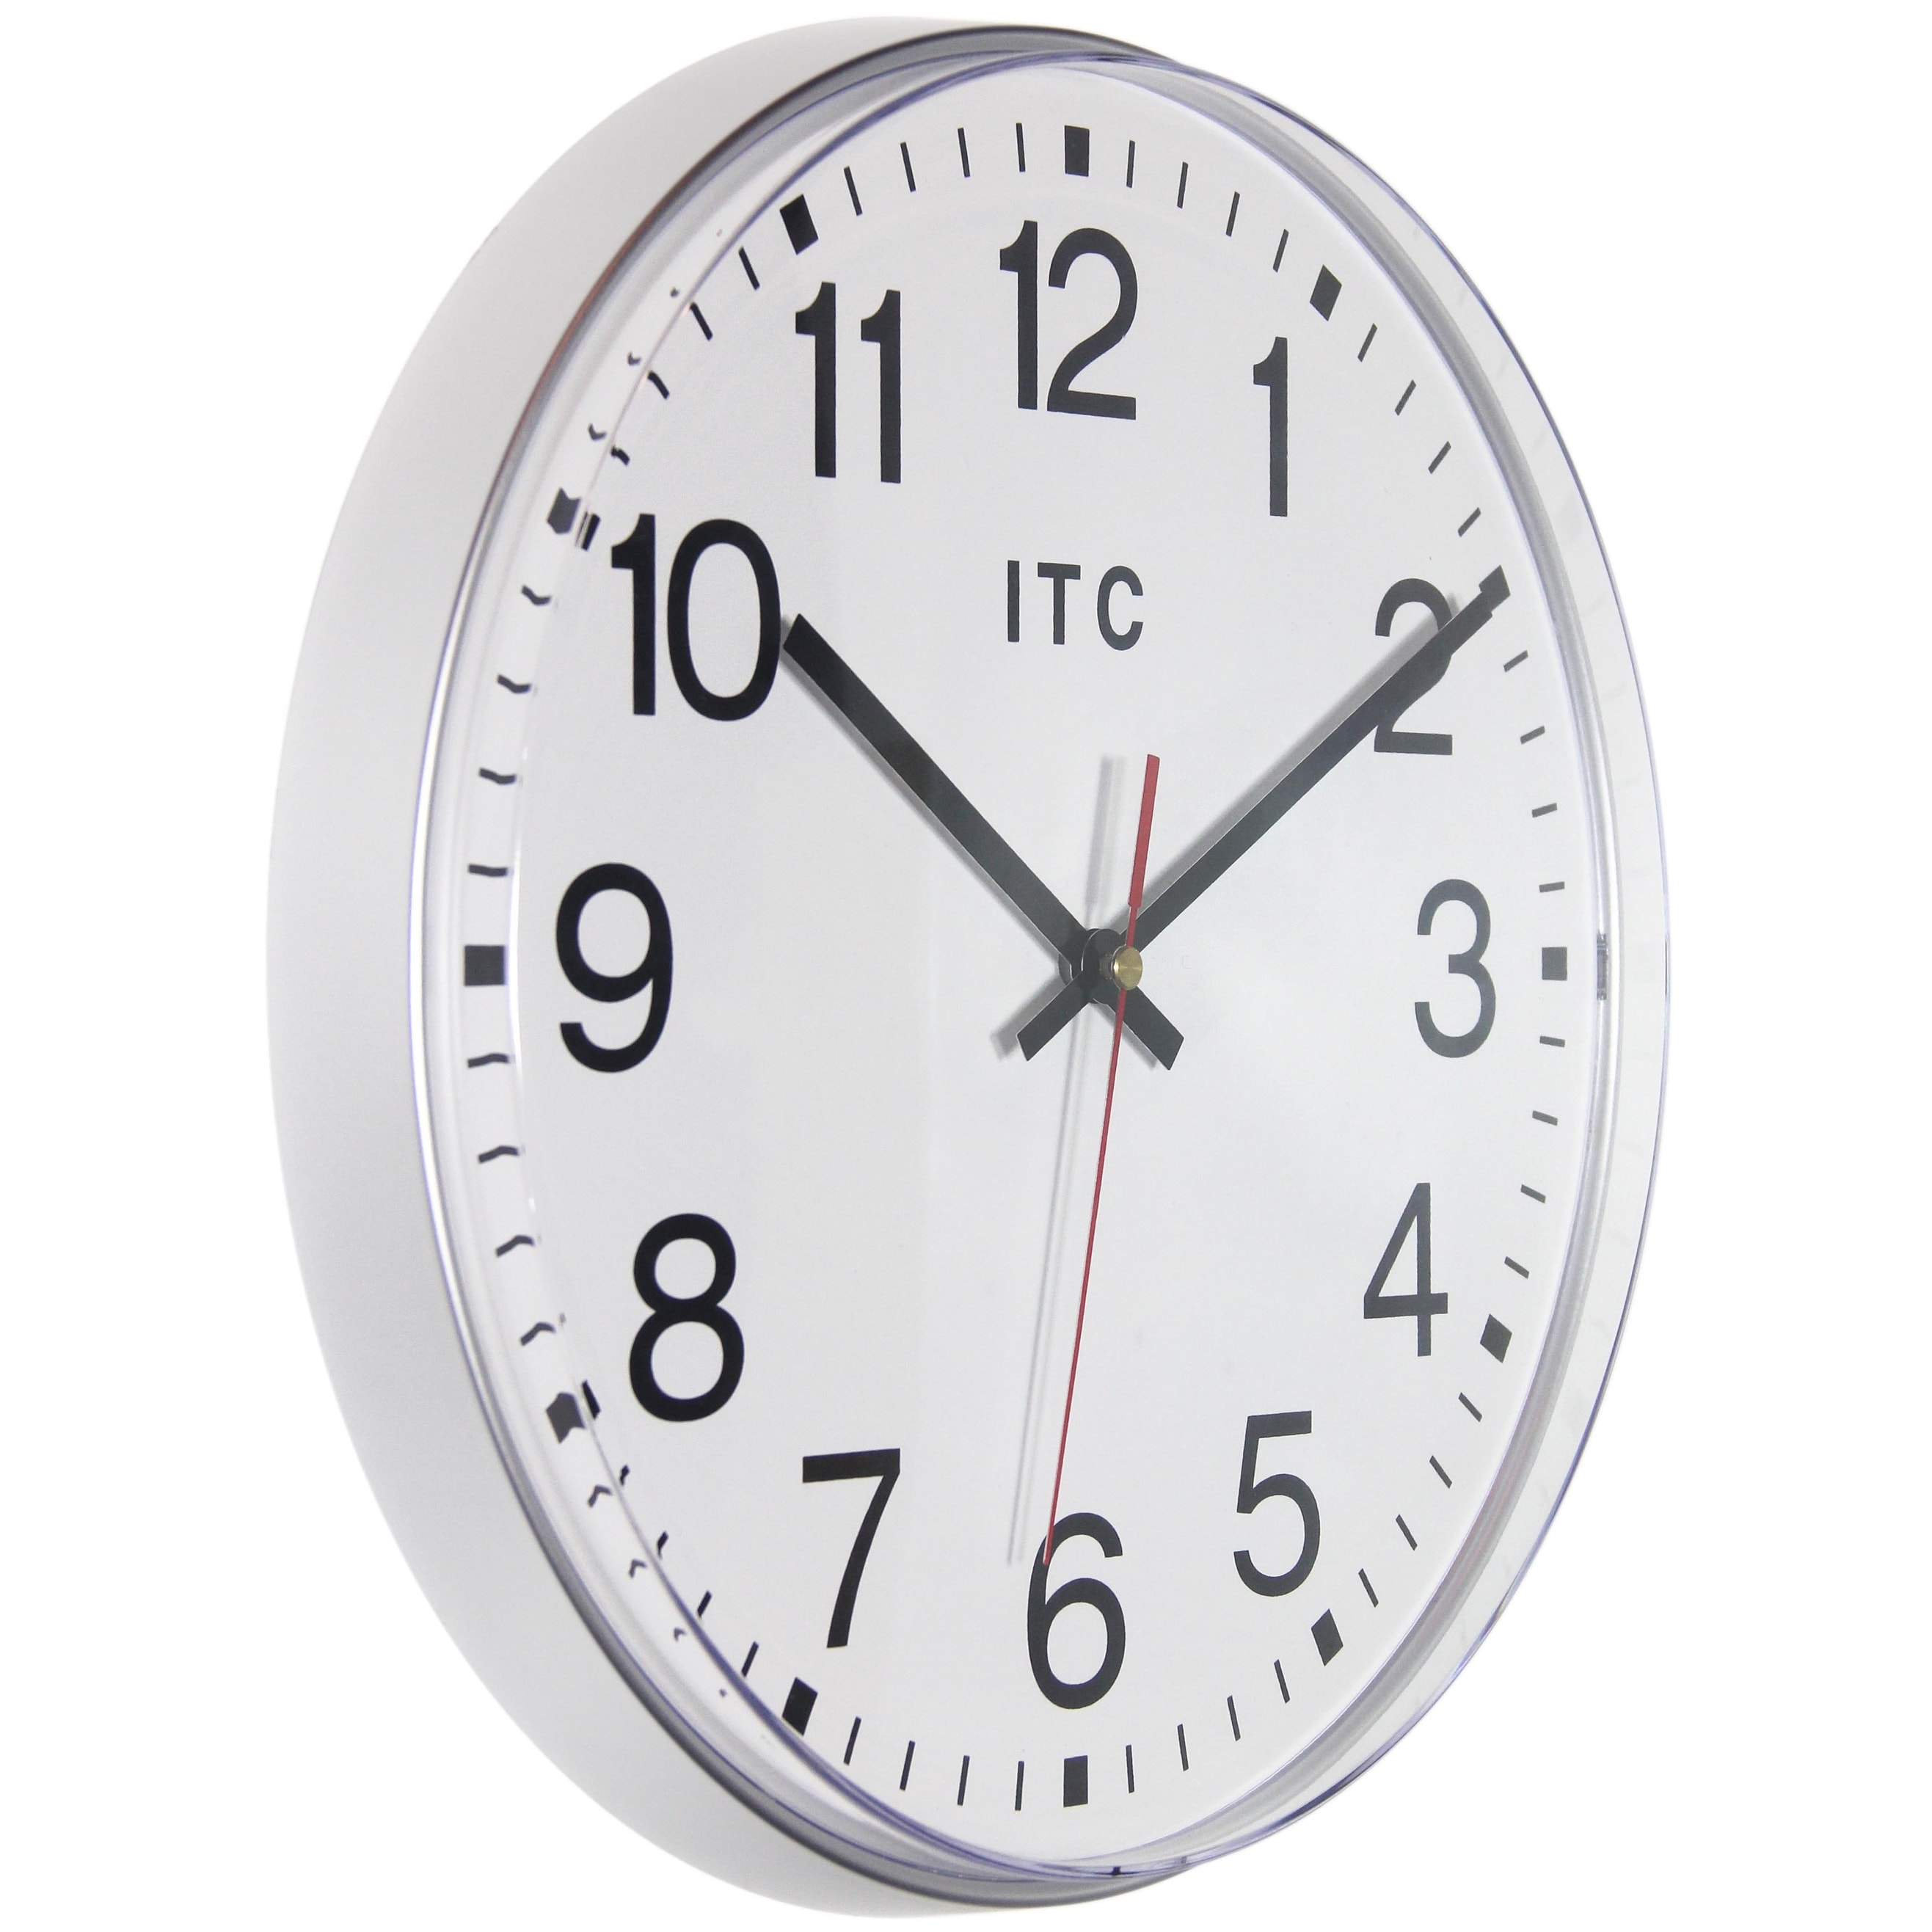 Prosaic 12 Business Clock, Silver - 12 in. - Bed Bath & Beyond - 37630749